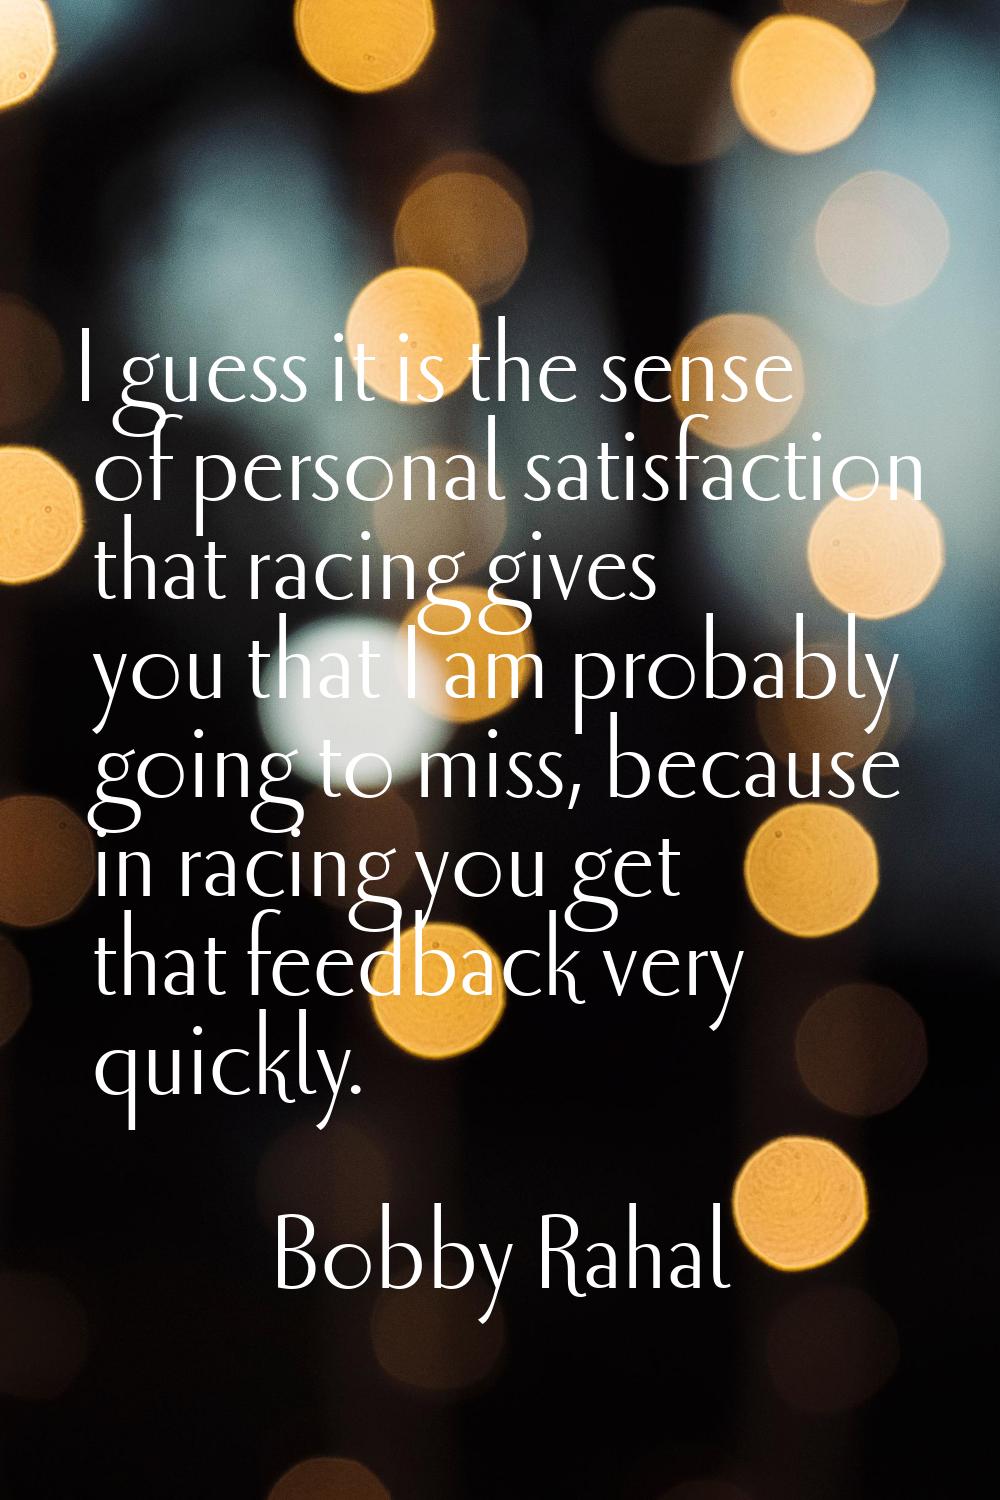 I guess it is the sense of personal satisfaction that racing gives you that I am probably going to 